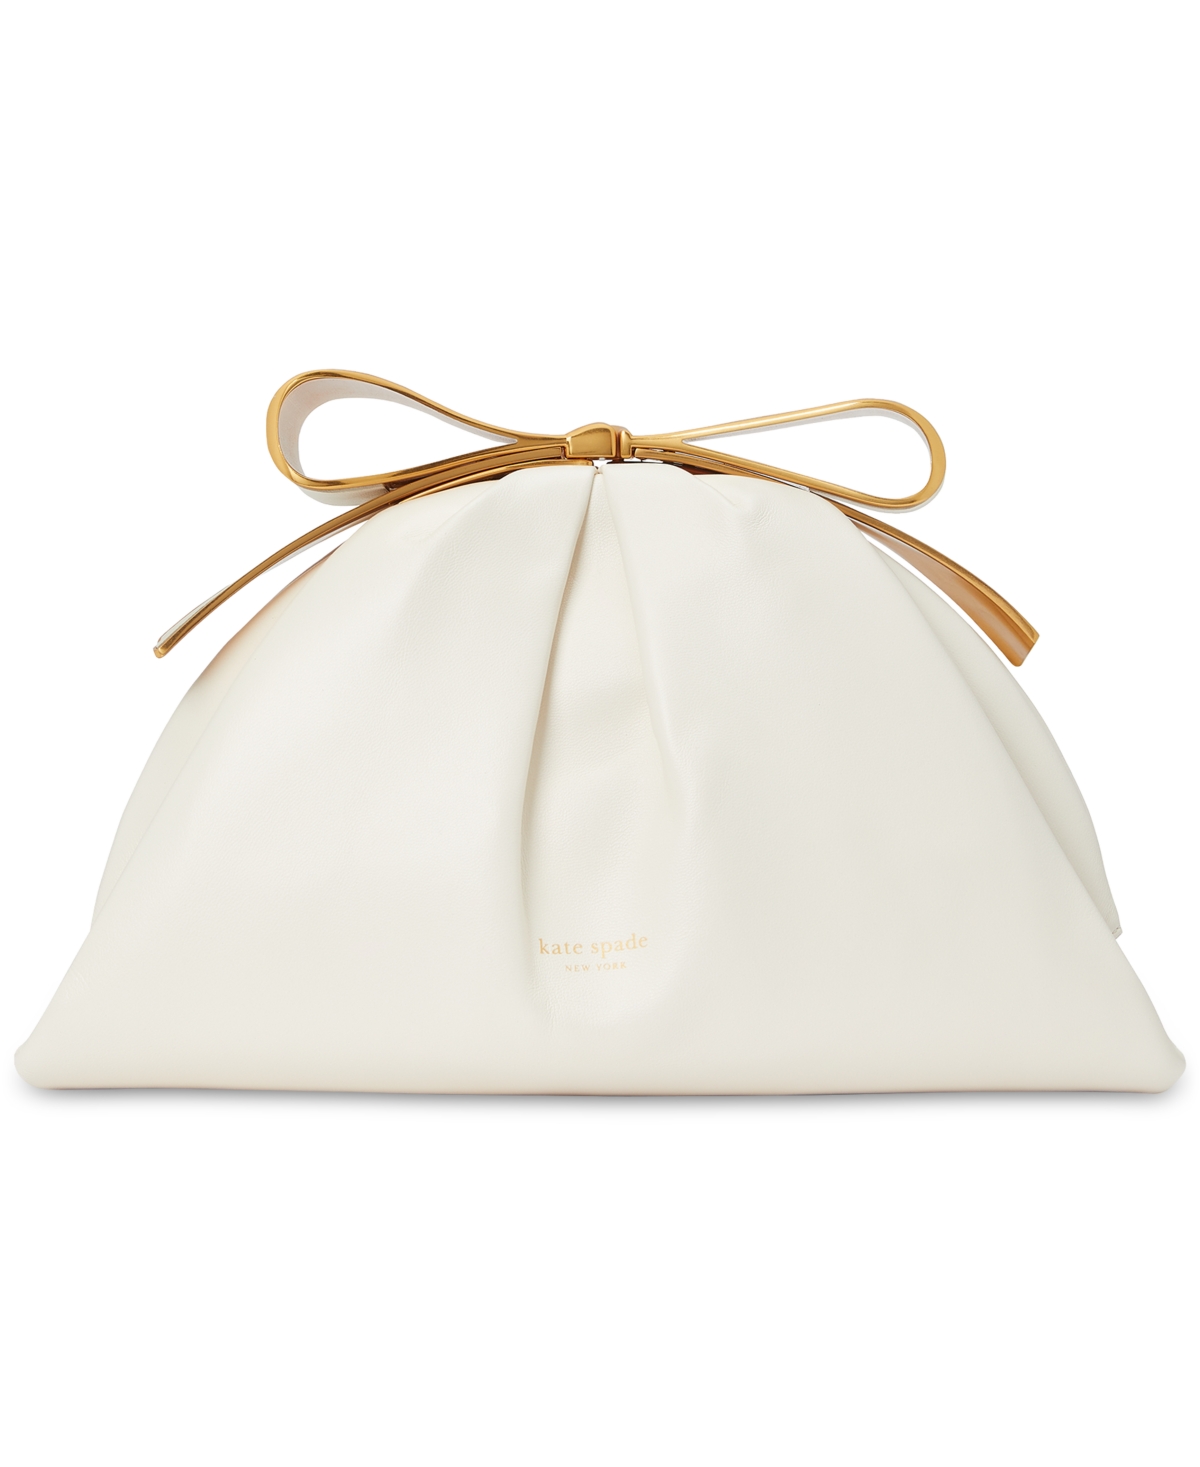 Kate Spade New York Medium Bridal Pearlized Leather Bow Frame Clutch In Cream.